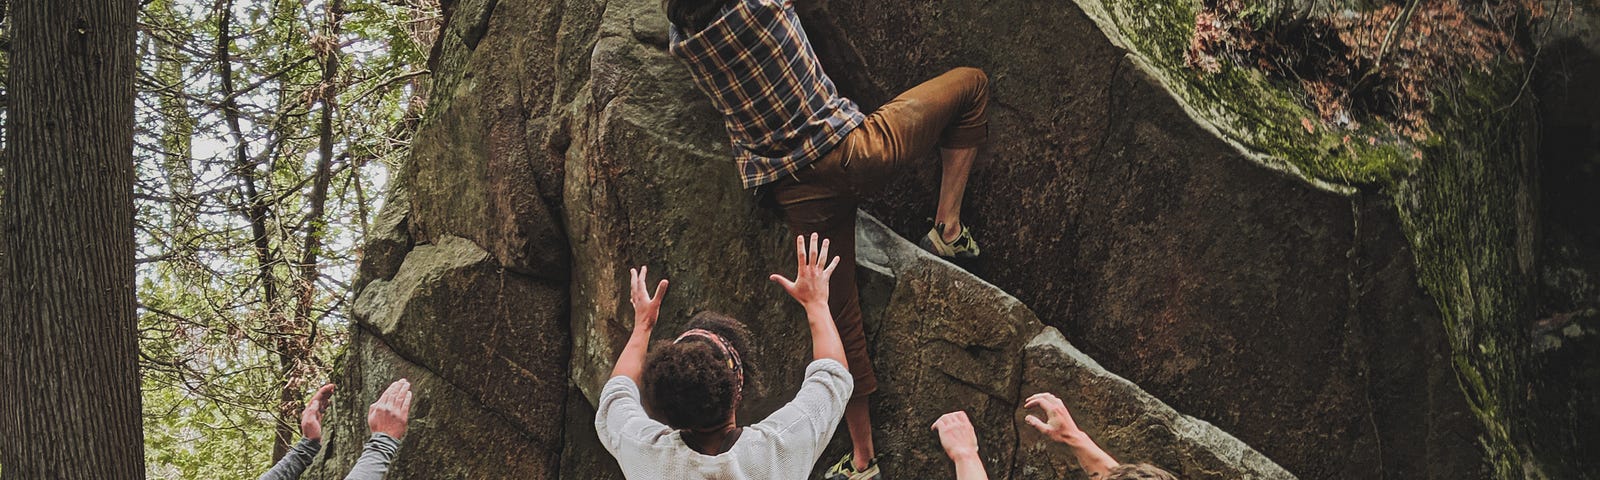 One person climbing the rock, and the other three stretch their arms and hands to support.